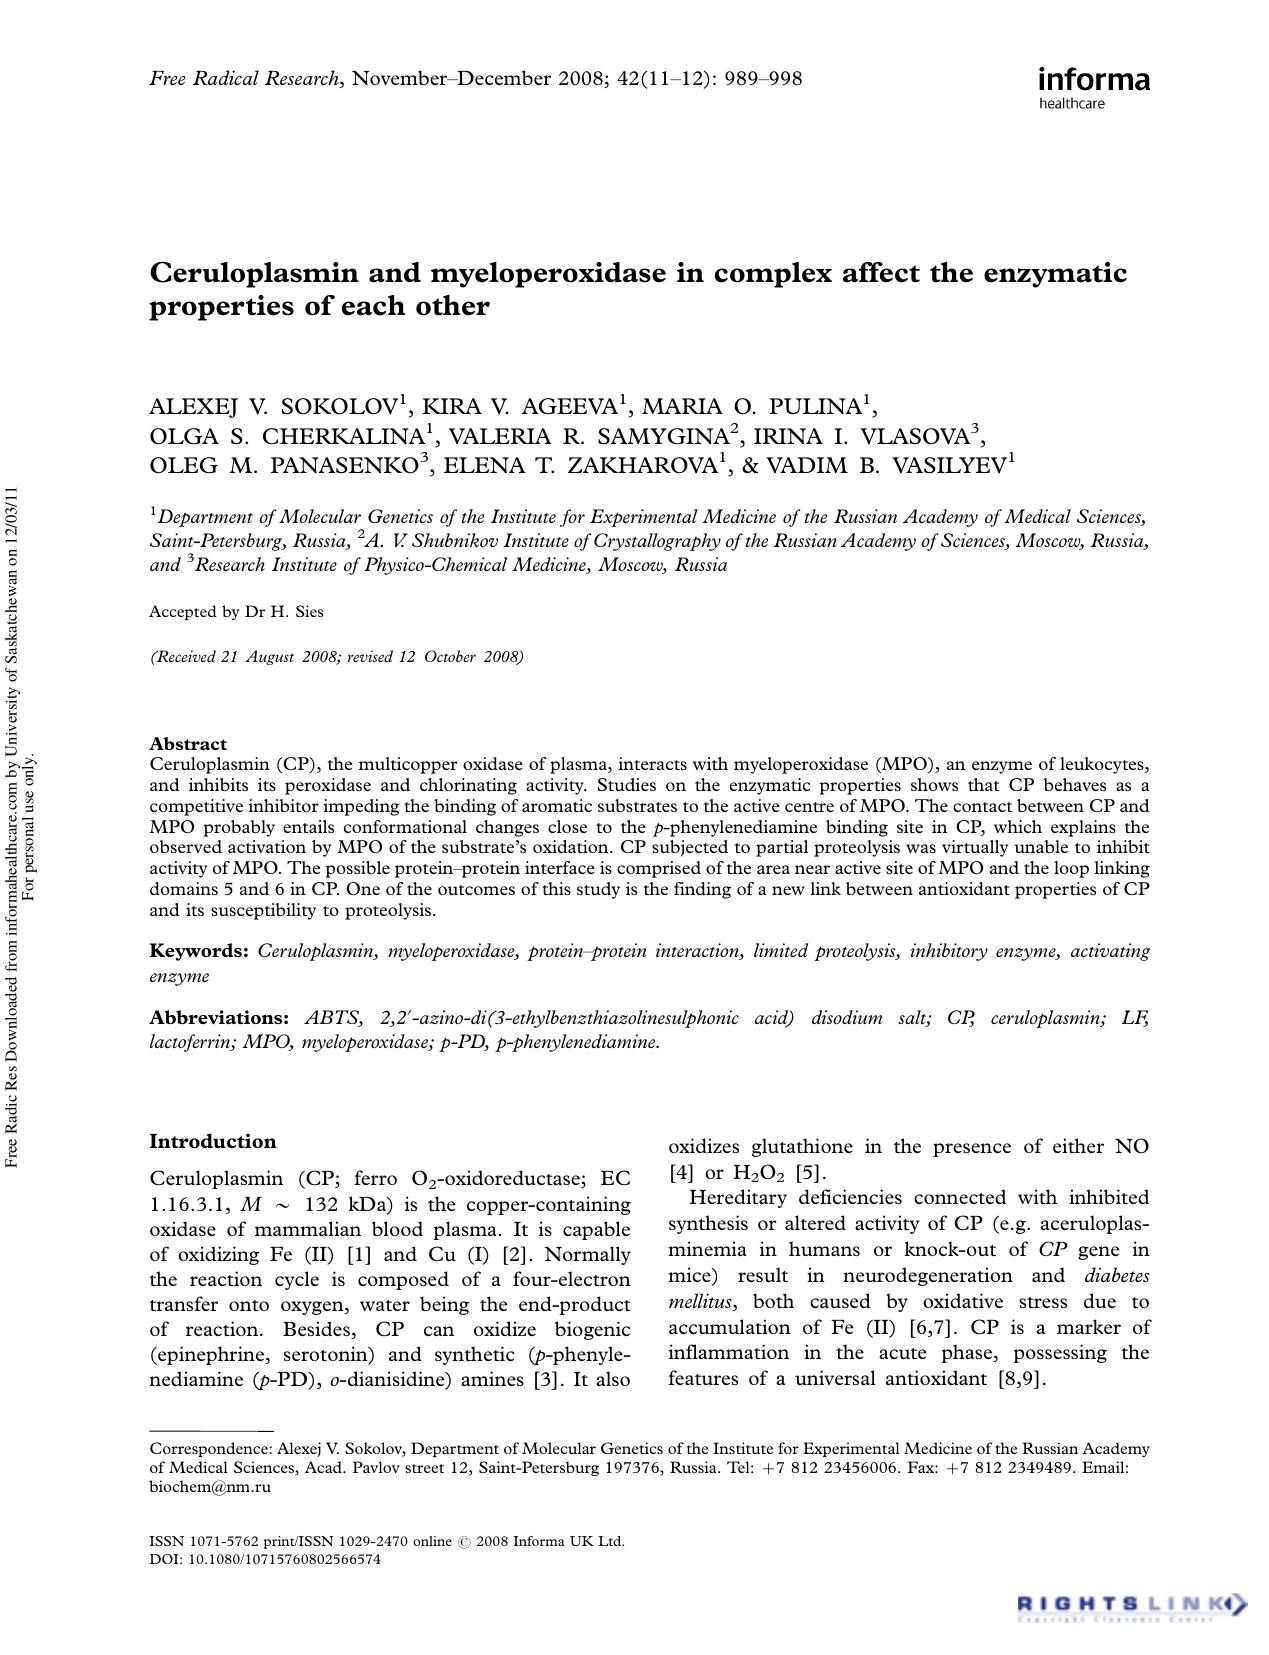 Ceruloplasmin and myeloperoxidase in complex affect the enzymatic properties of each other by unknow